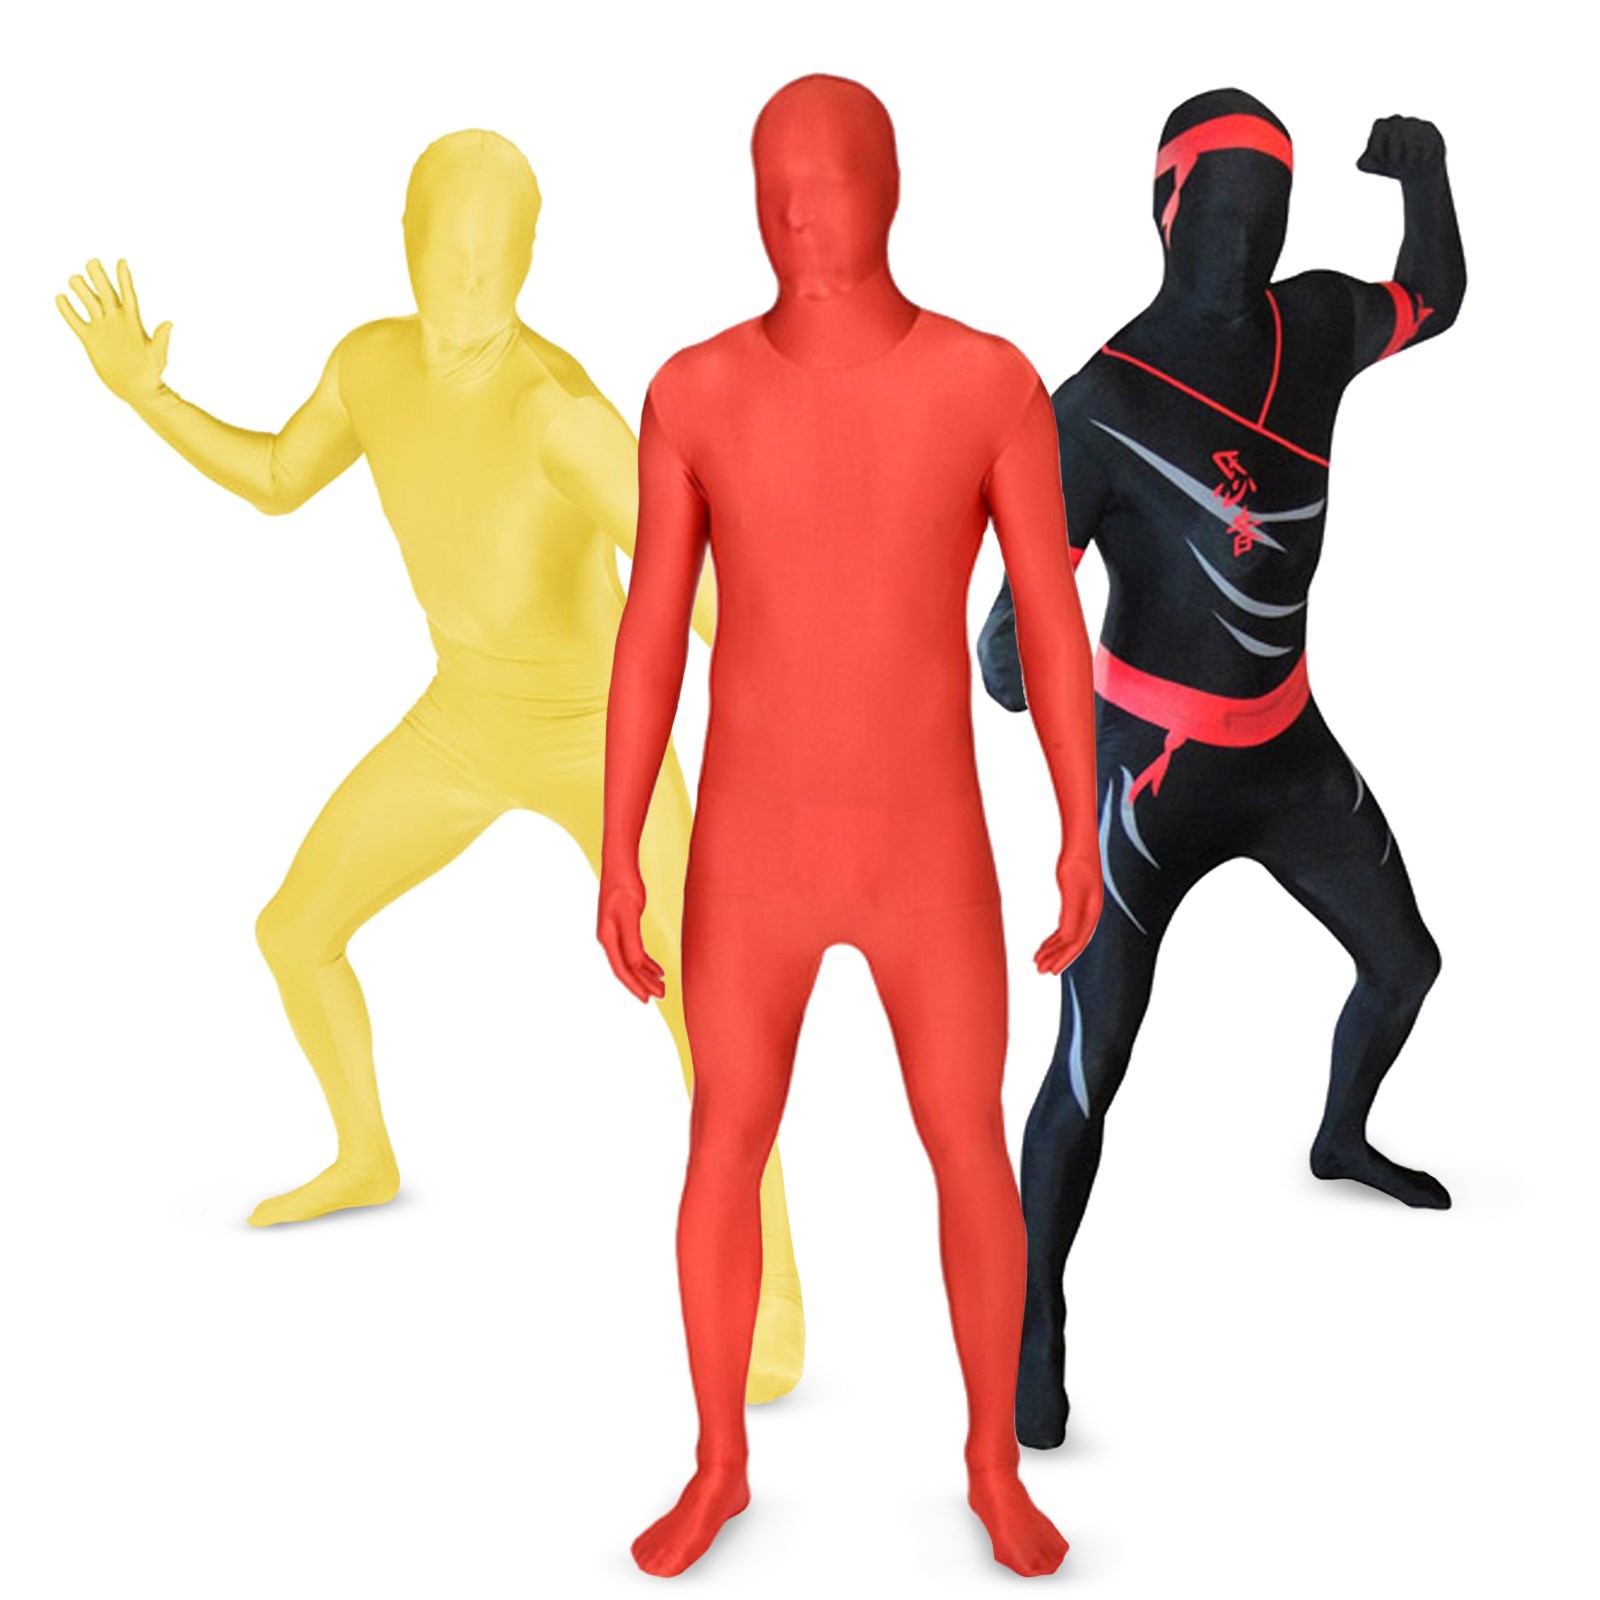 Skin Suit Group Costumes